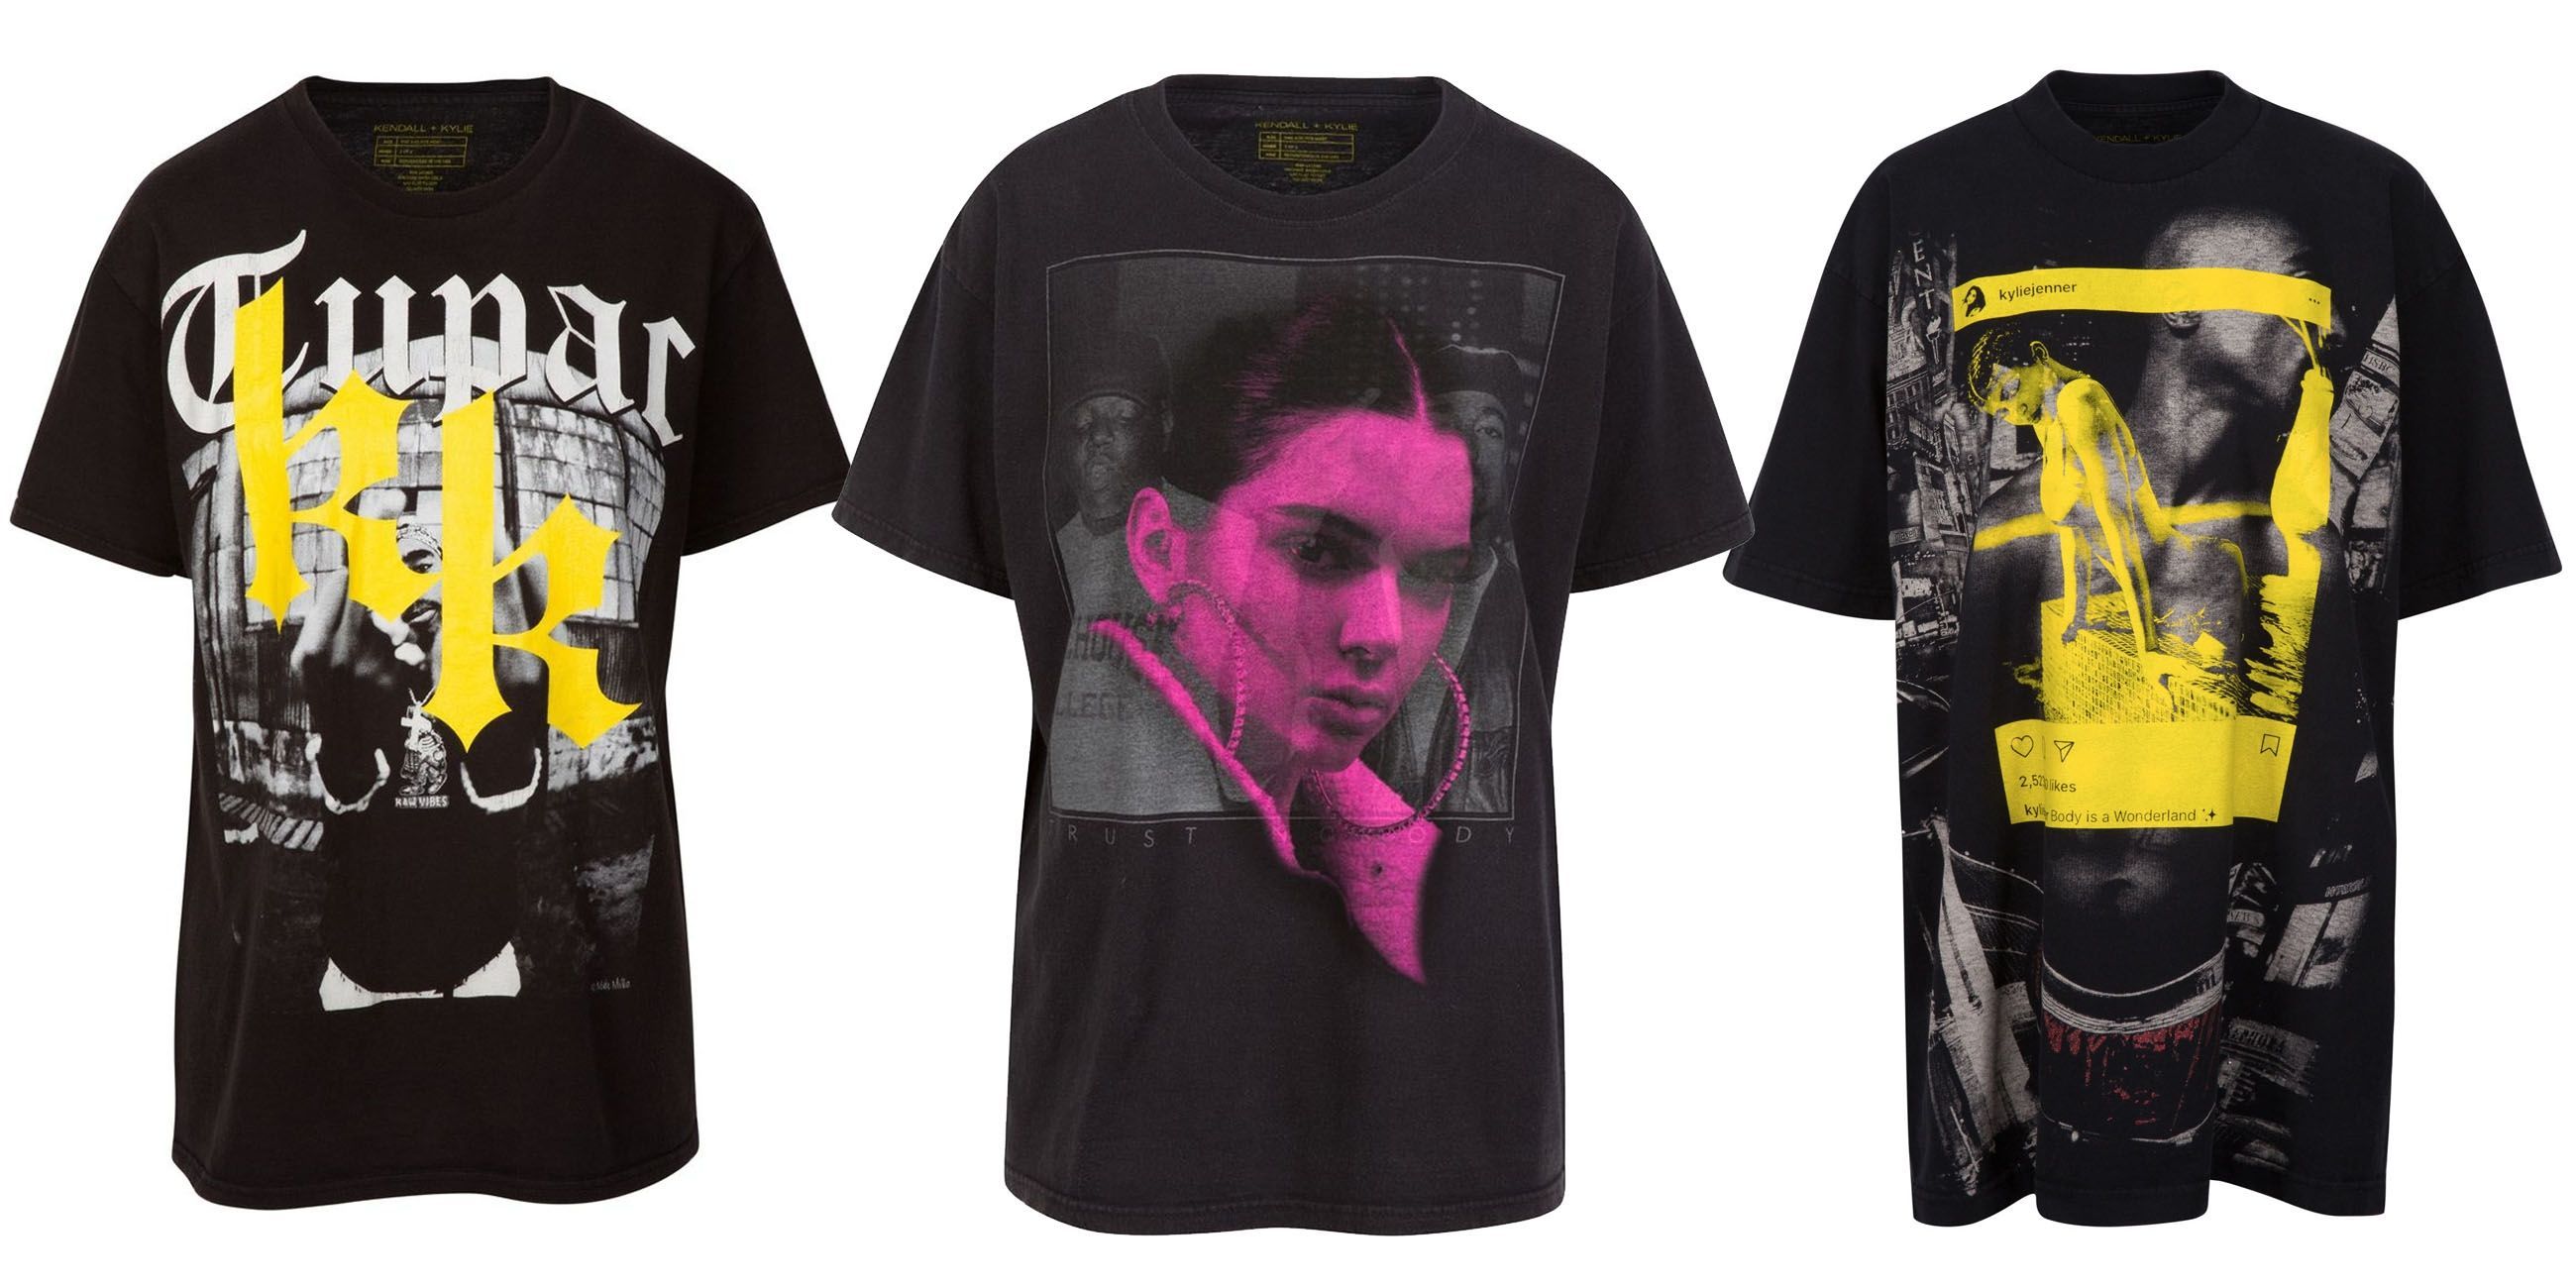 Kendall and Kylie Tupac and Biggie T-Shirts - Kendall and Jenner Vintage Band T-Shirts Controversy